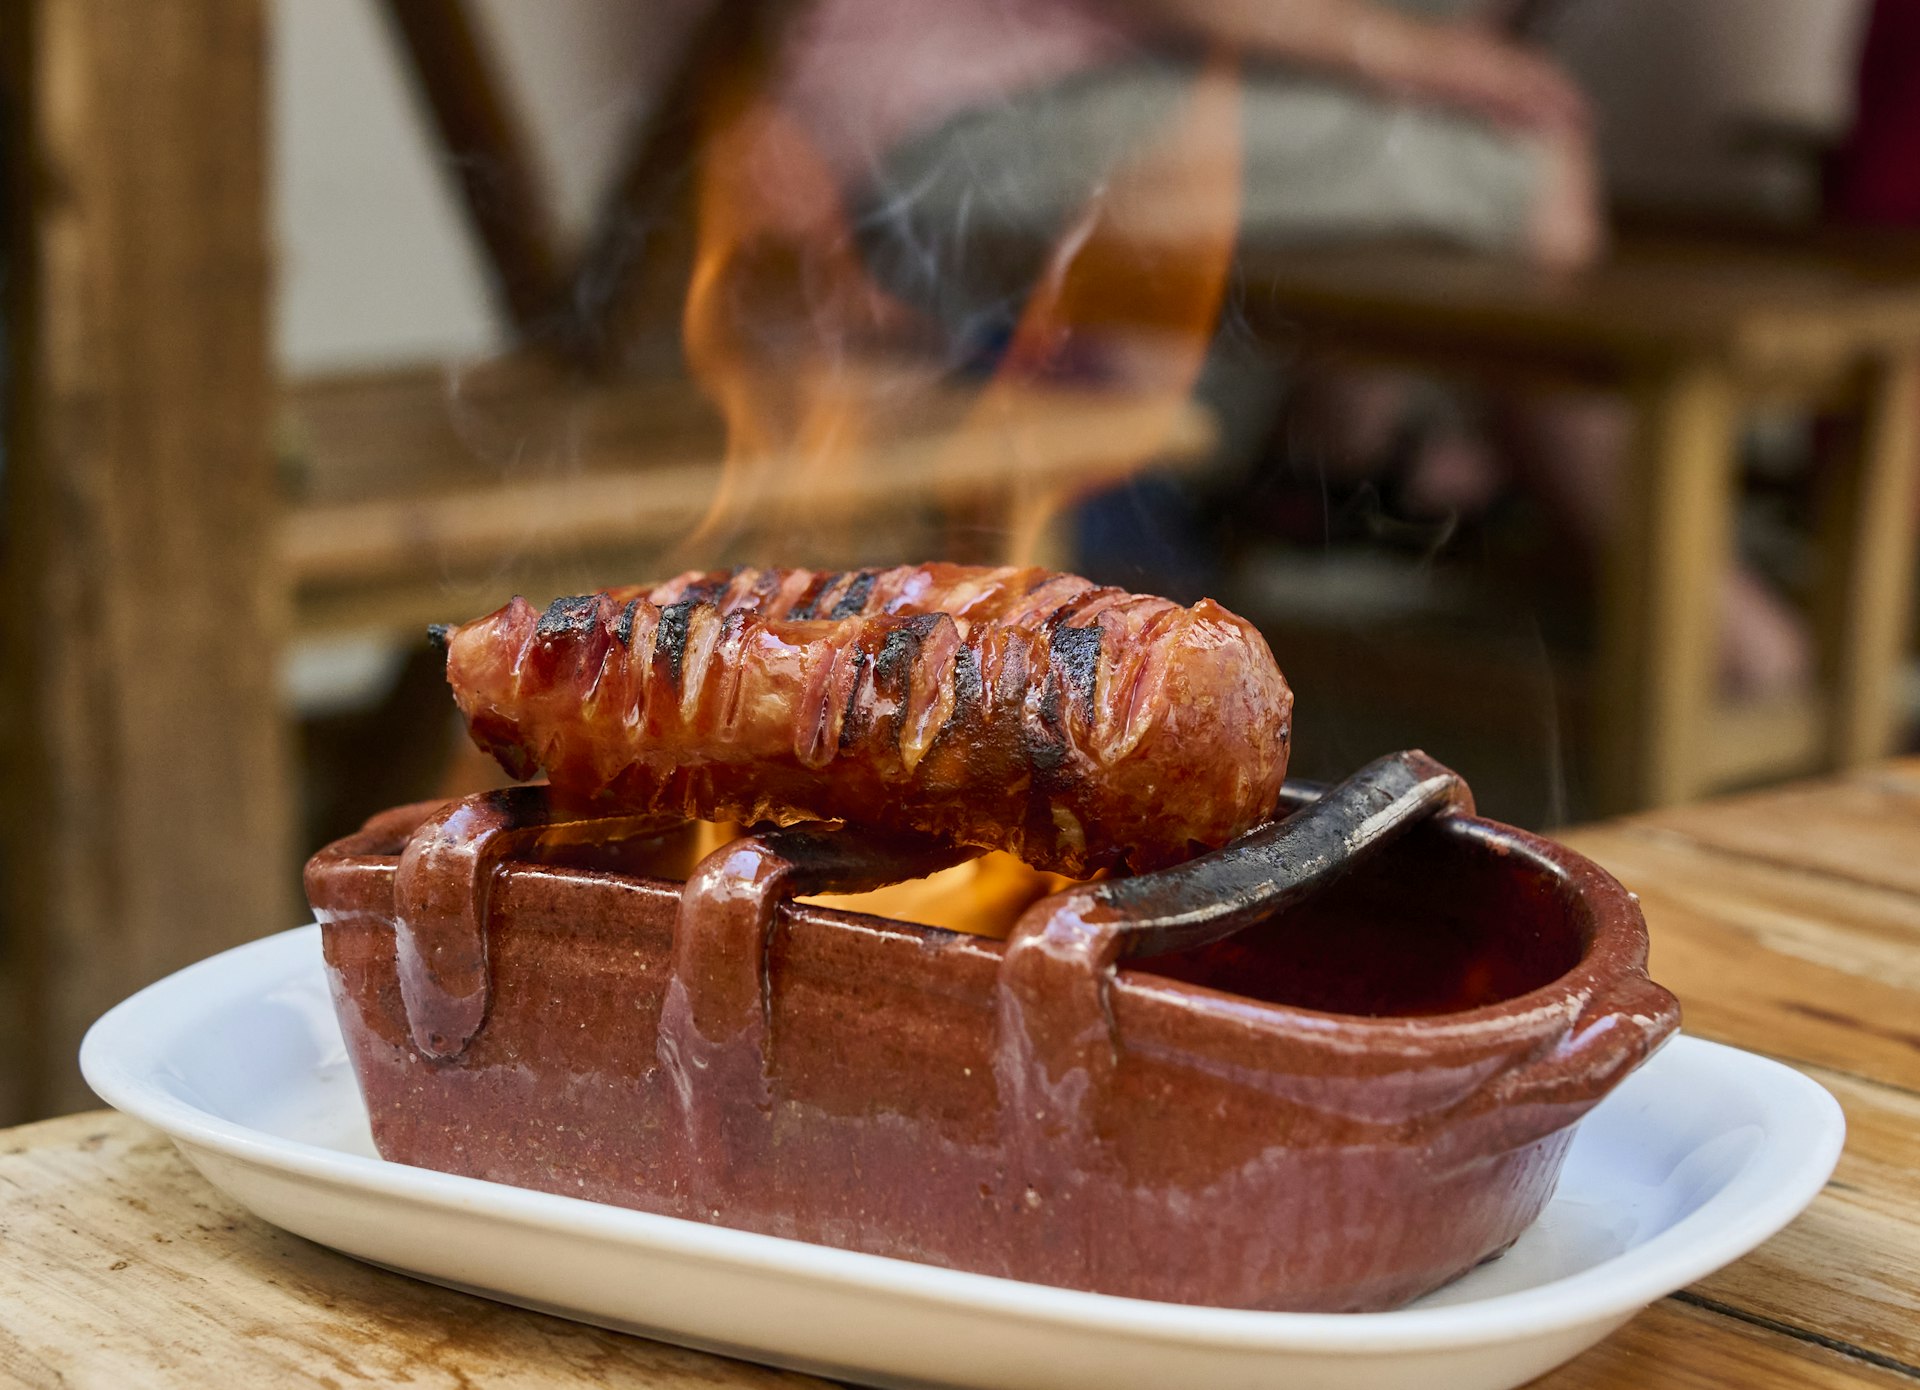 A black pork chouriço asado (grilled sausage) is flame-cooked over alcohol in a terracotta grill at Casa do Alentejo, Lisbon, Portugal, Europe